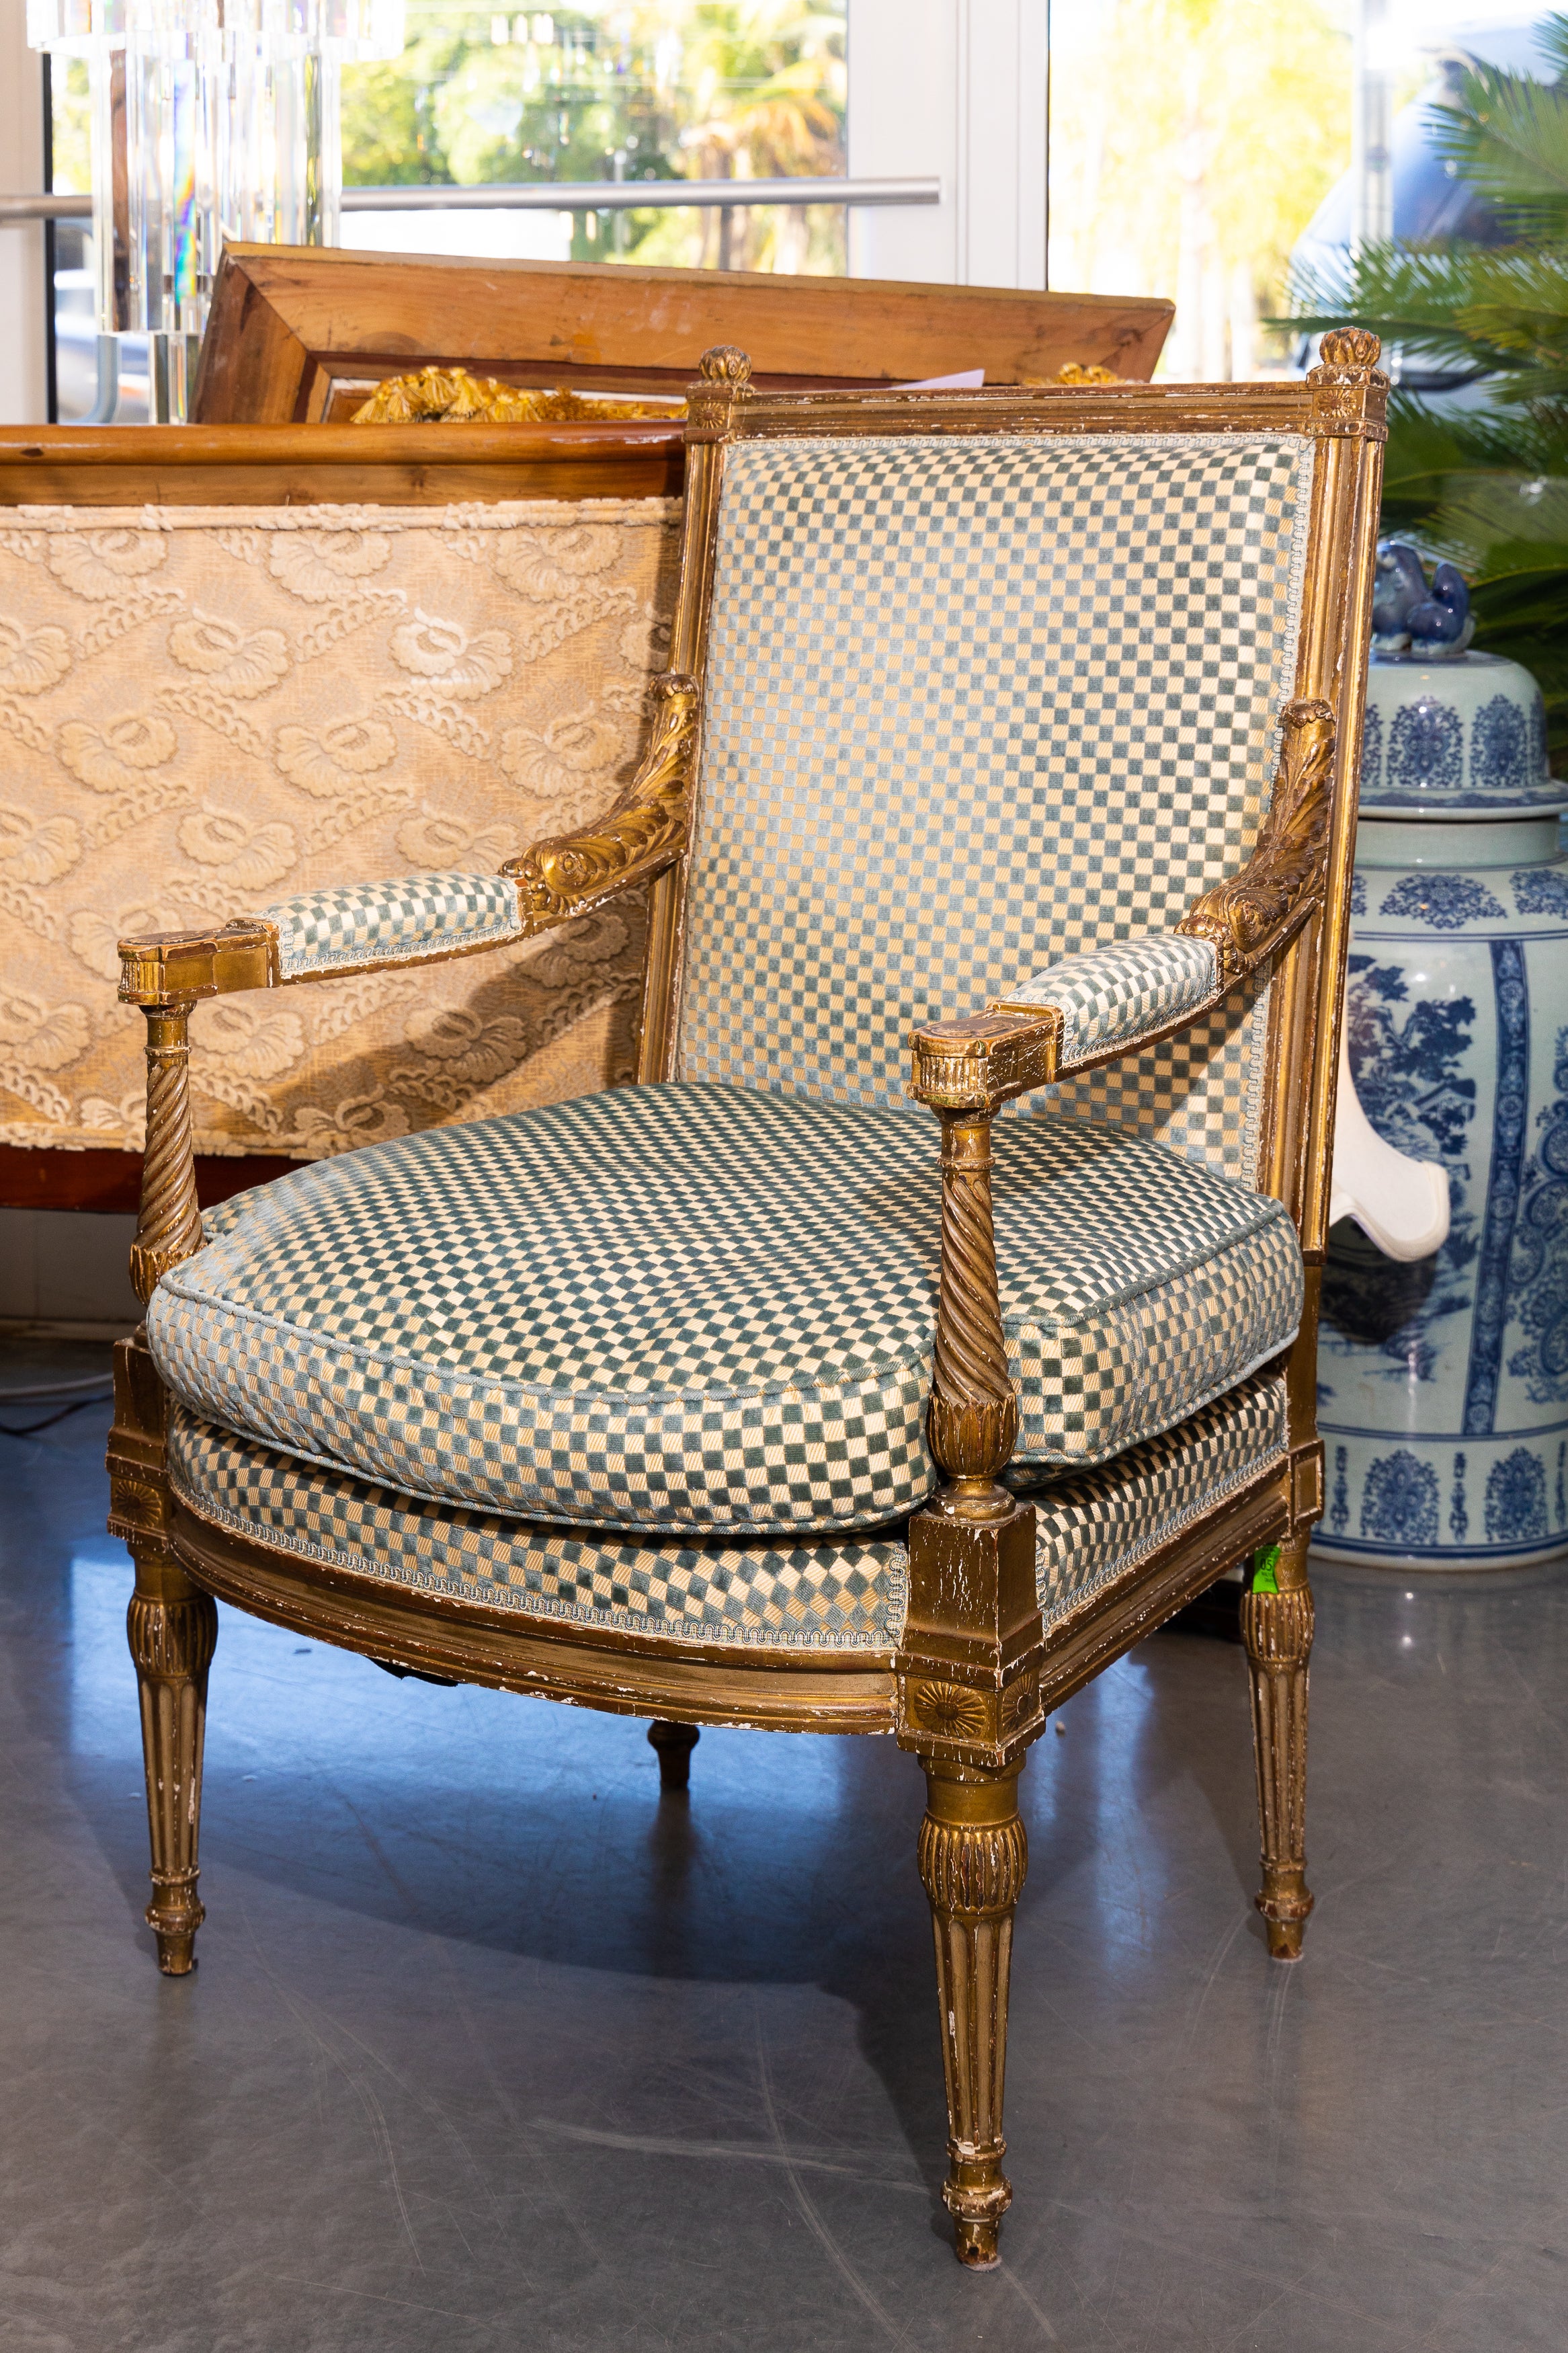 This is a French Louis XVI style gilt arm chair with square crest rail and out-scrolling arms, flanking upholstered back and seat with loose cushions. The chair is supported by round tapered fluted legs, 19th century.